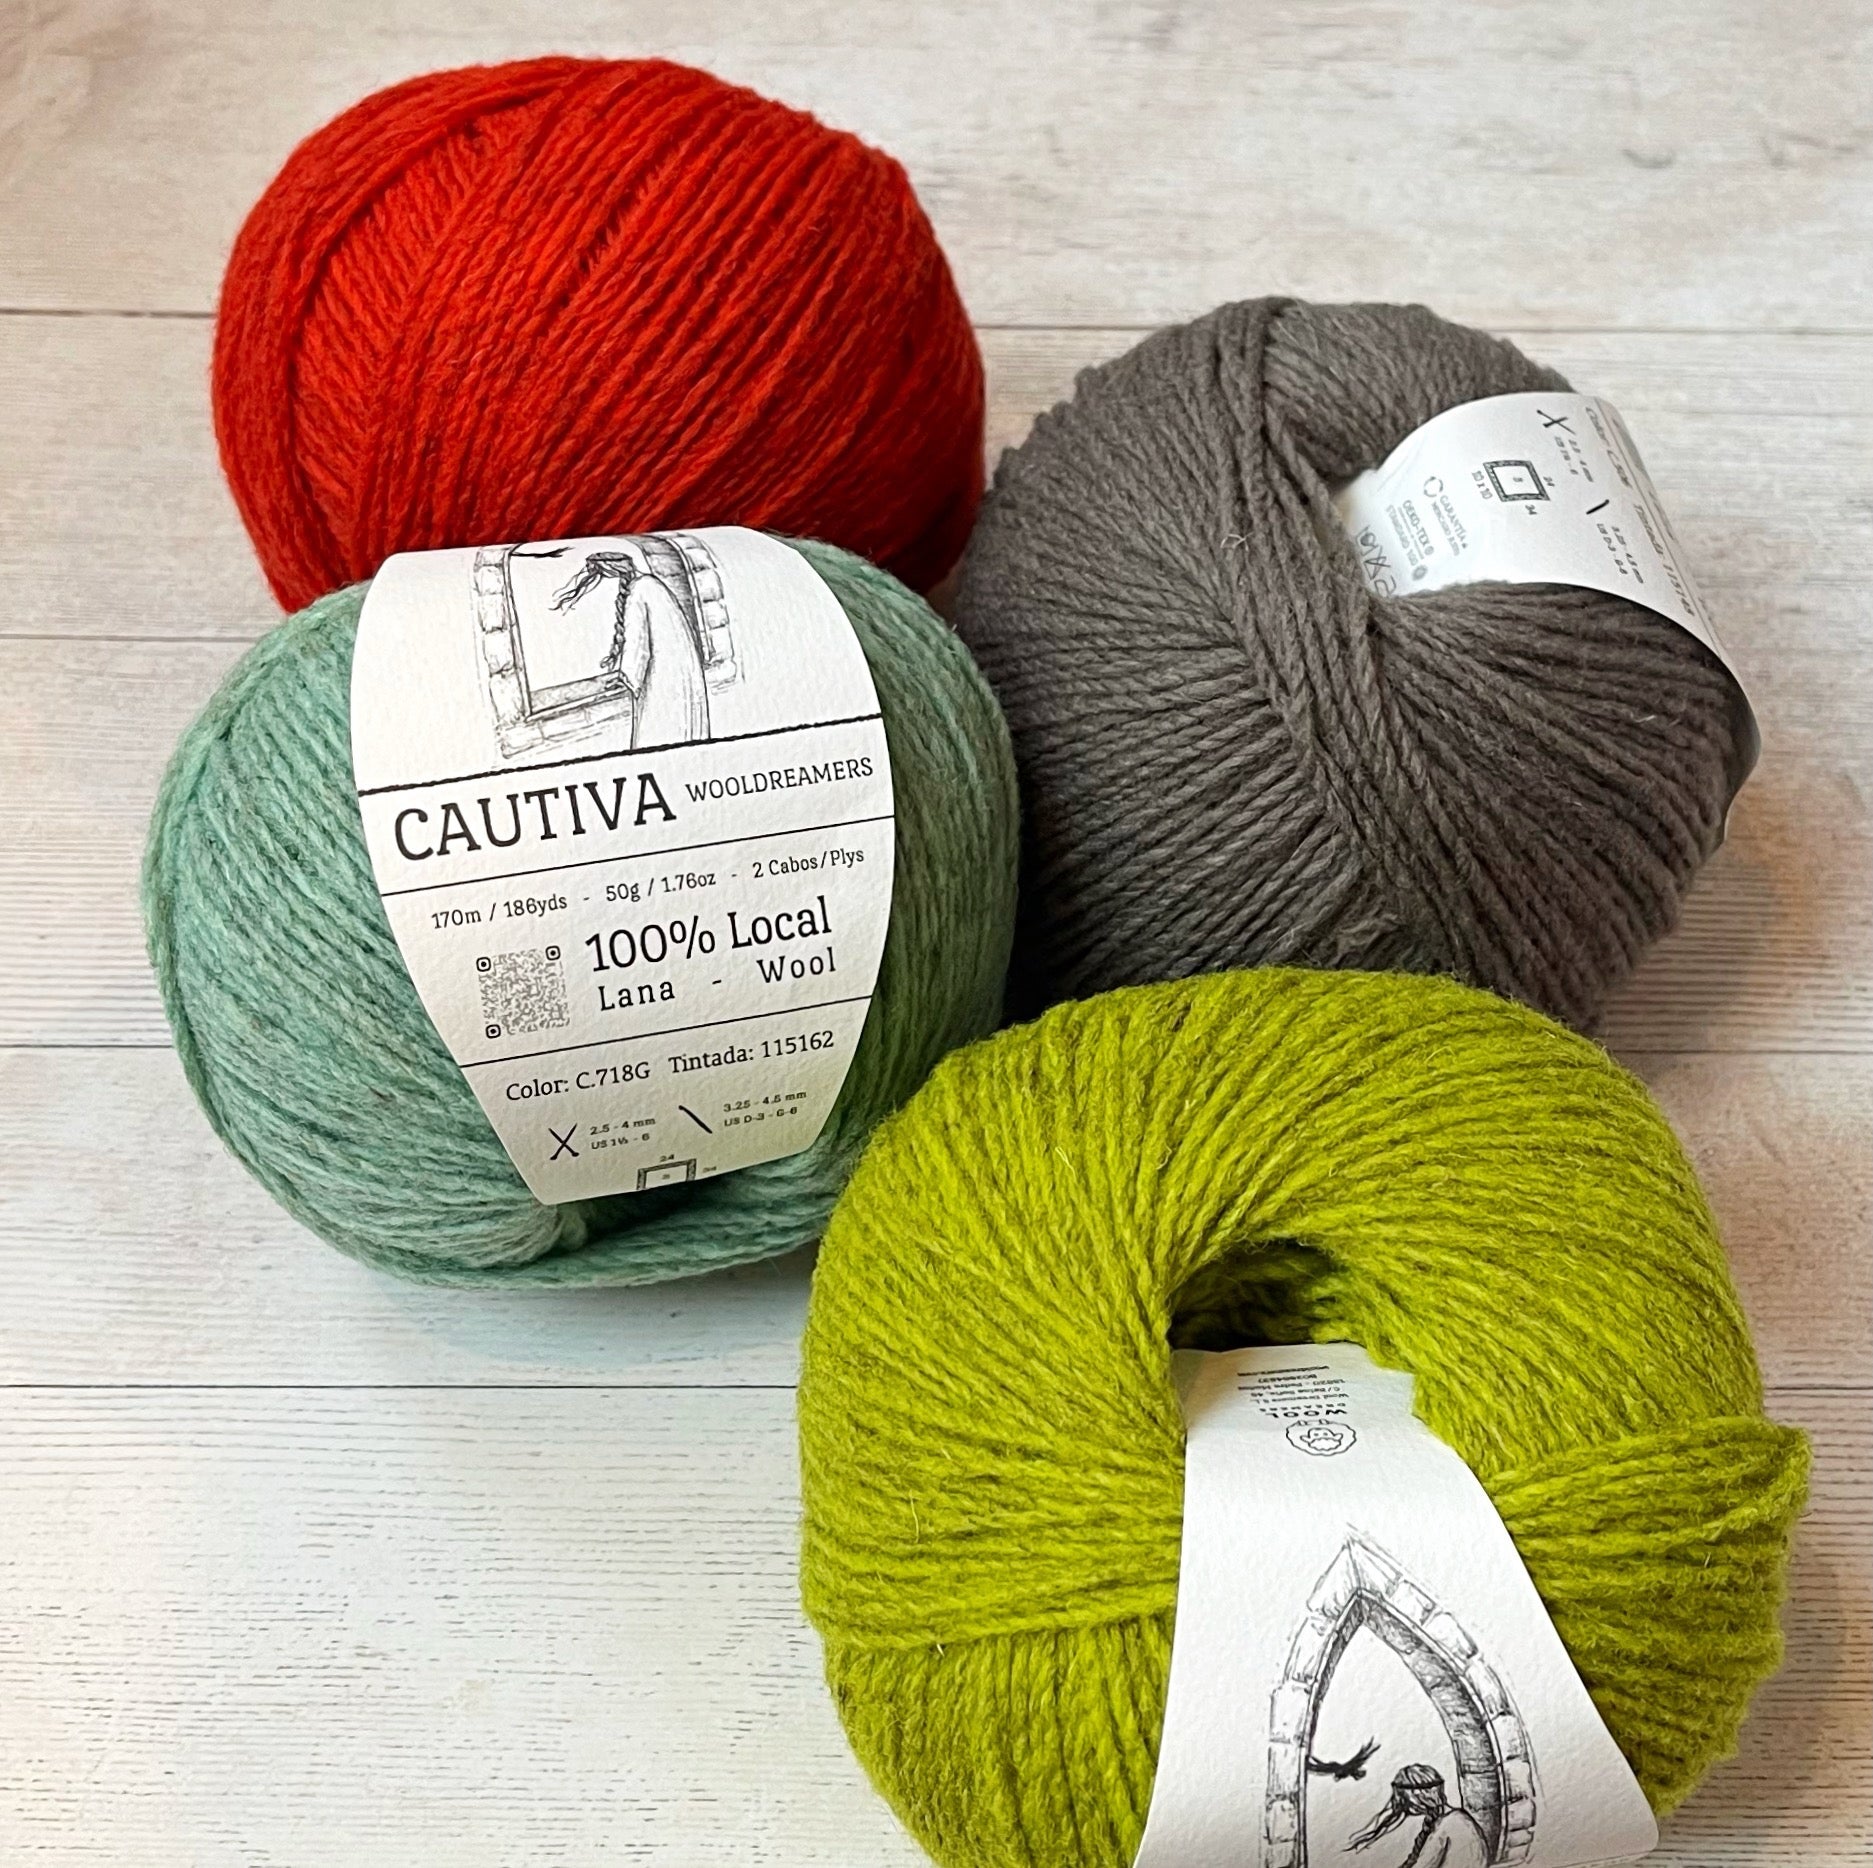 Cautiva by Wooldreamers Wooldreamers